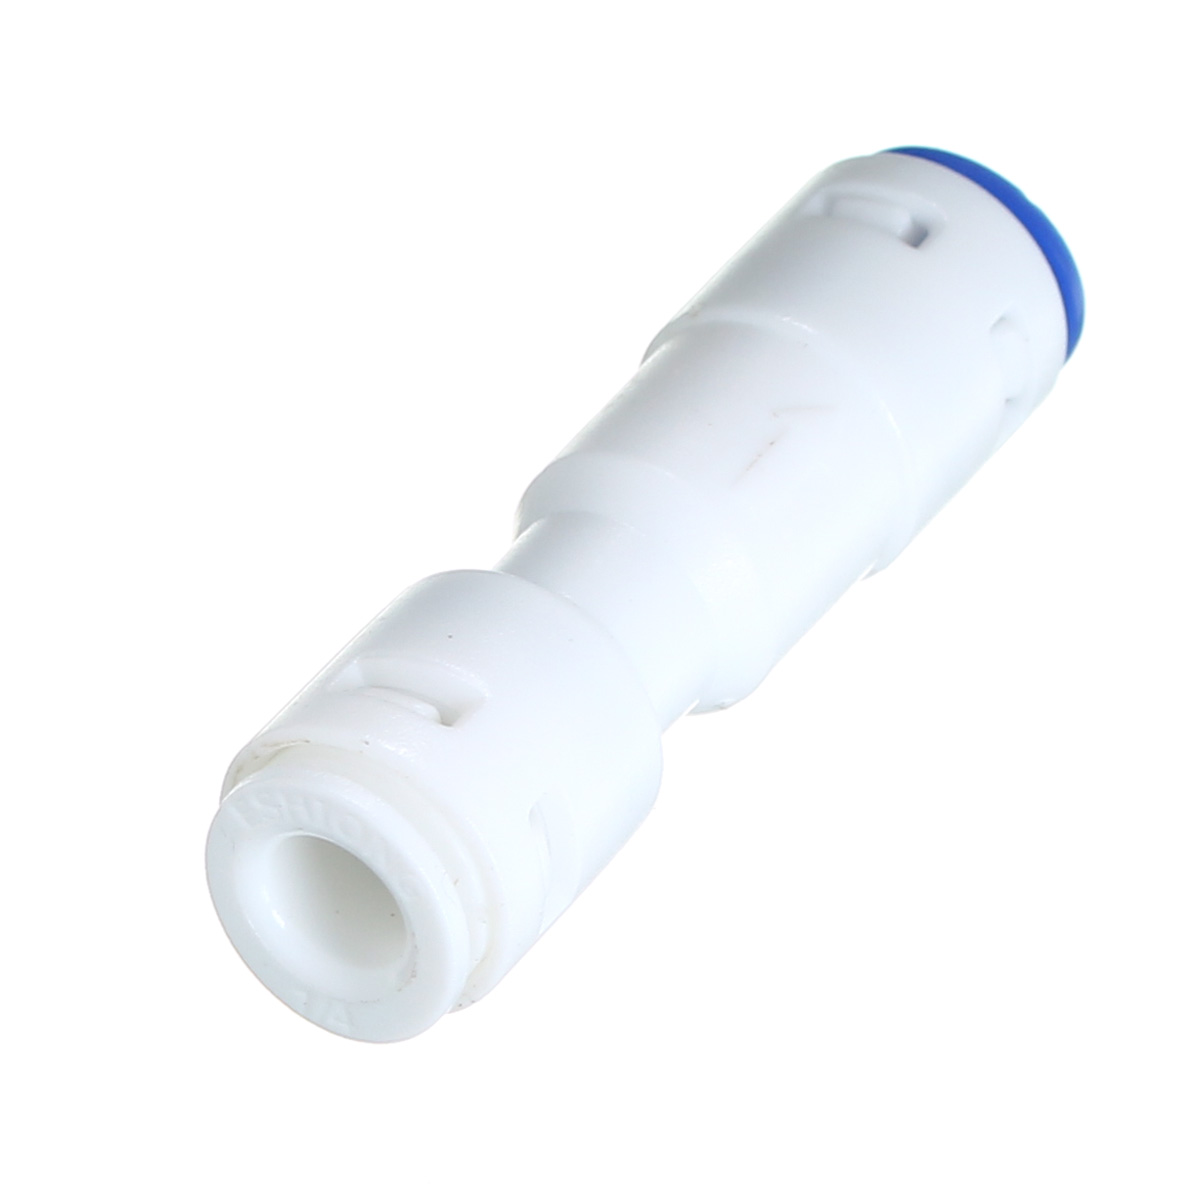 Valve-Switch-Check-Valve-for-Ro-Pure-Water-Reverse-Osmosis-System-Filters-Water-Filter-1290503